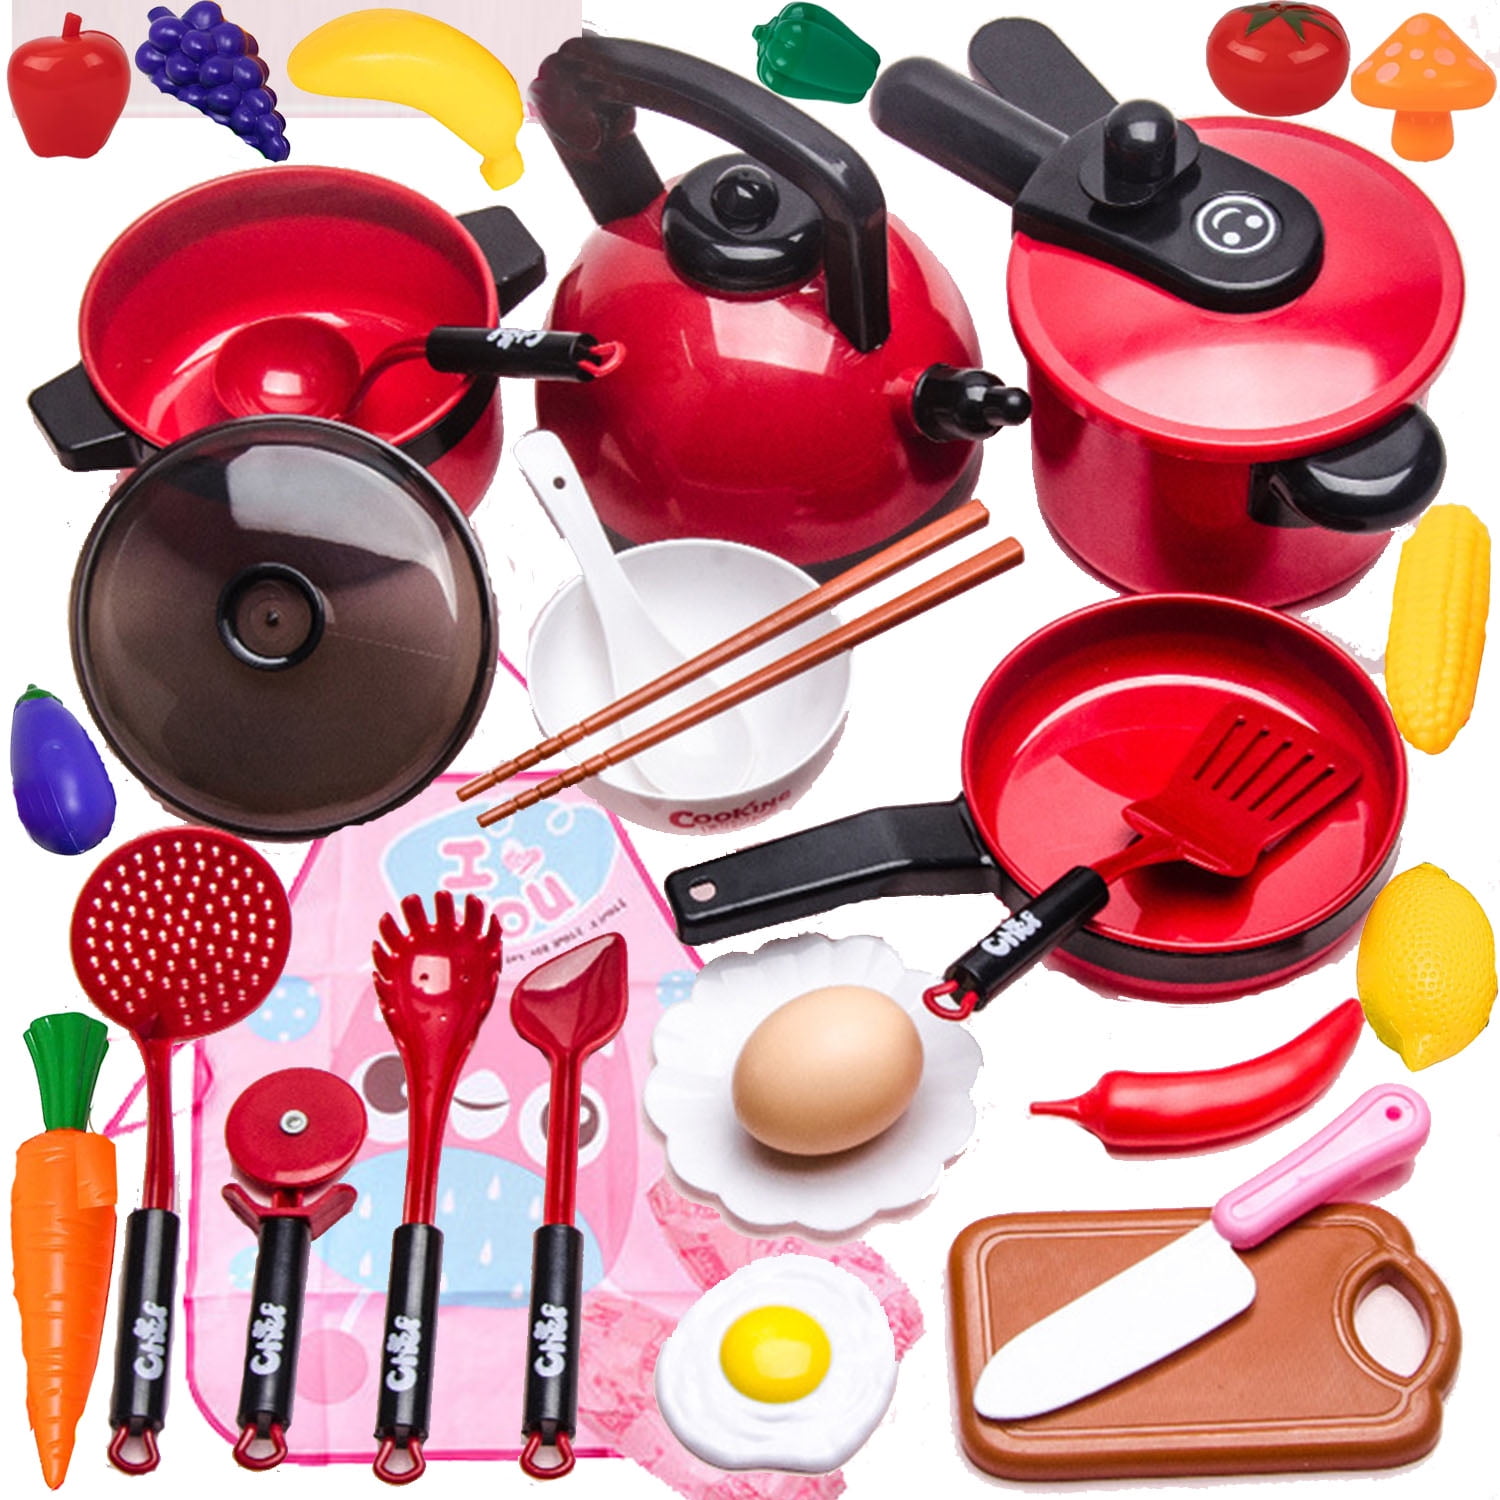 NimJoy Pretend Play Cooking Set W/ABS Cookware Kits Toys for Girls